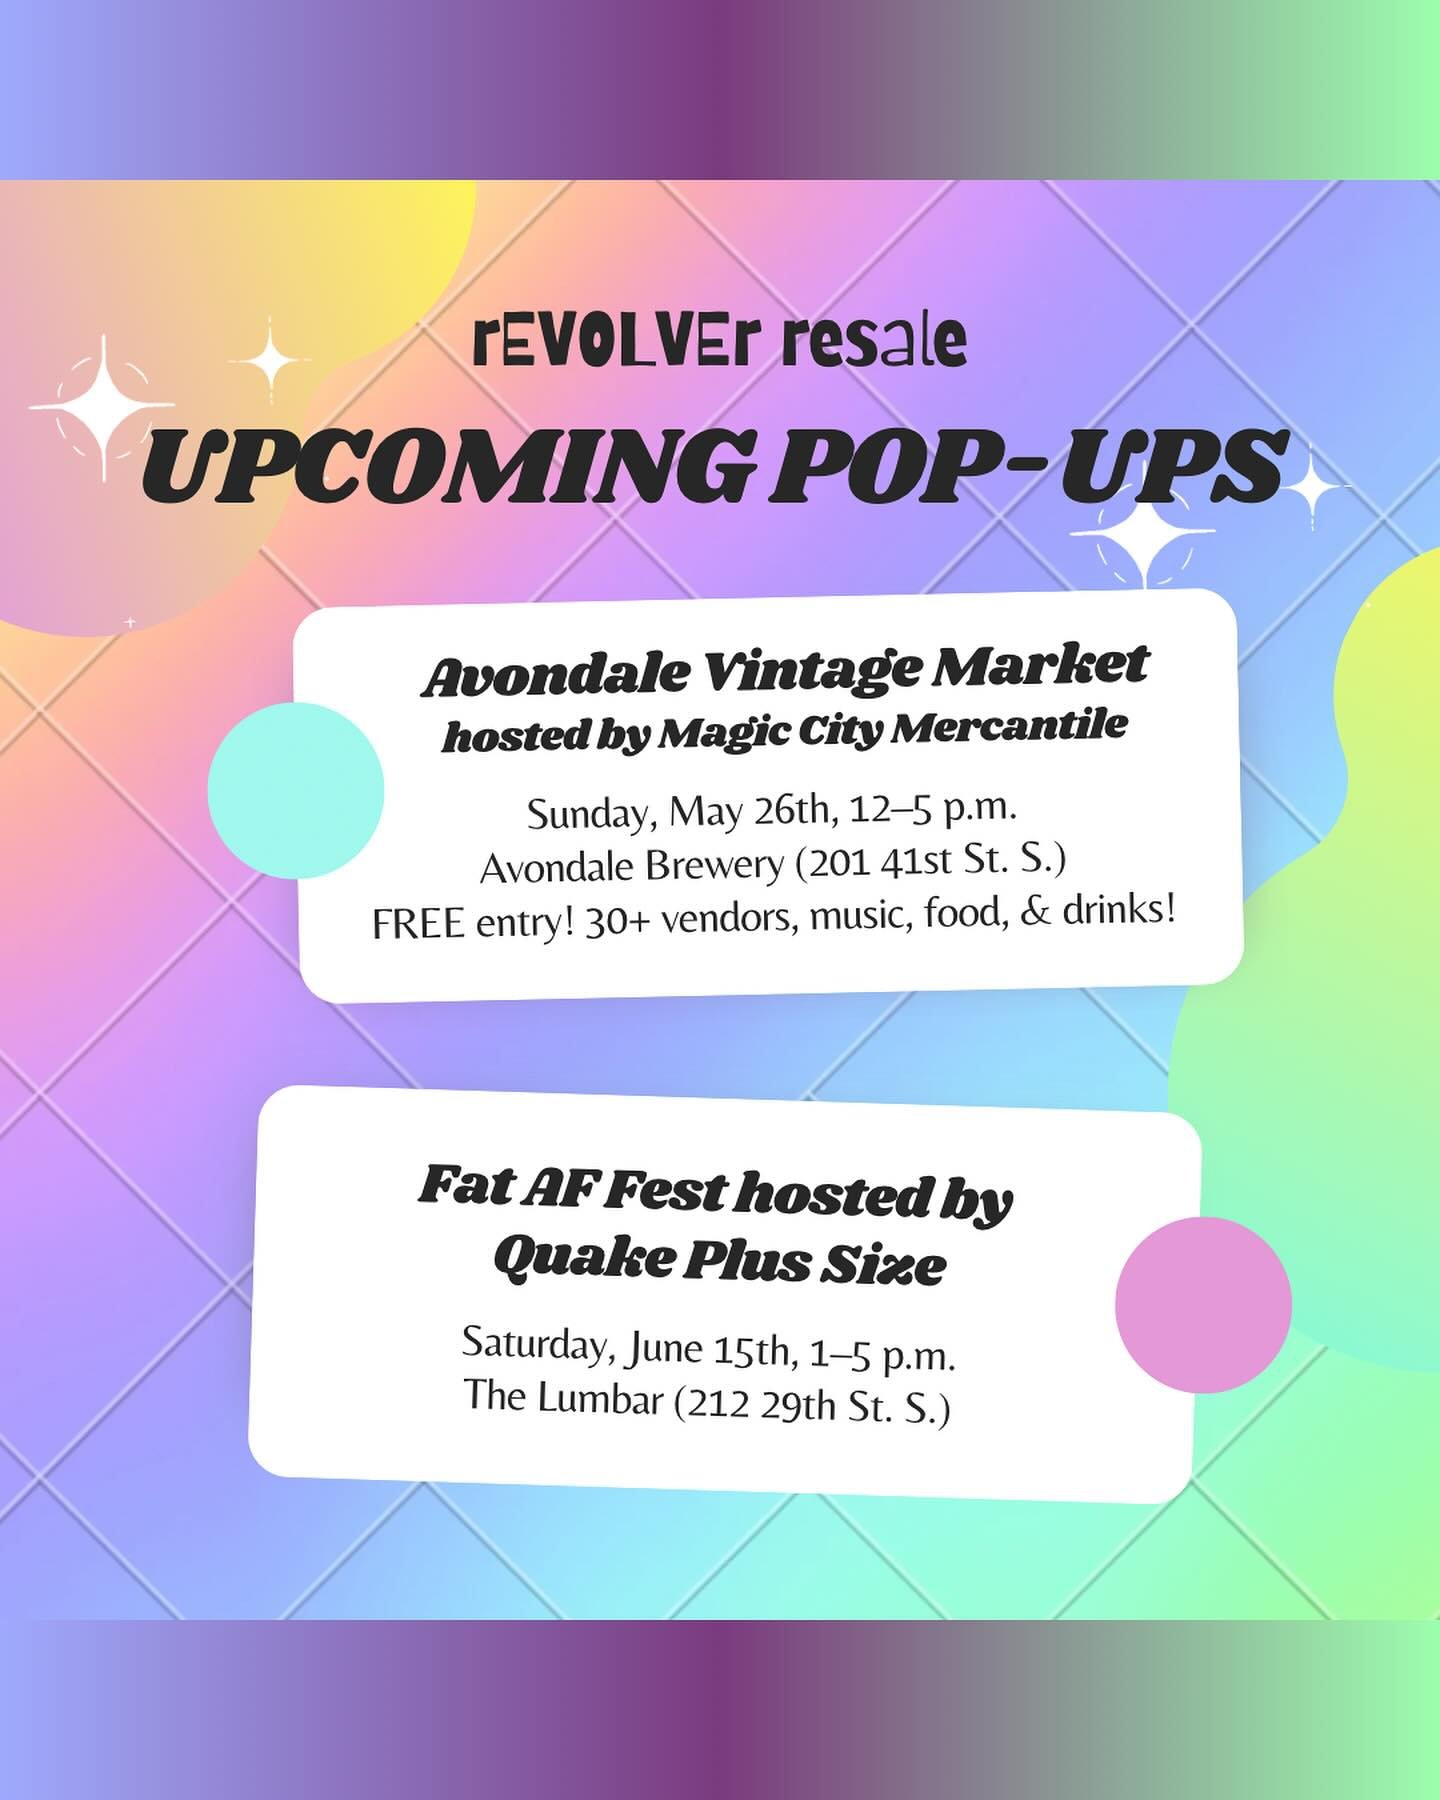 In addition to having regular hours at our brick-and-mortar in Five Points S., we have a couple of pop-ups coming up! Come see us at the Avondale Vintage Market on May 26th from 12-5 in the backyard of @avondalebrewing hosted by @magiccitymerc!!

30+